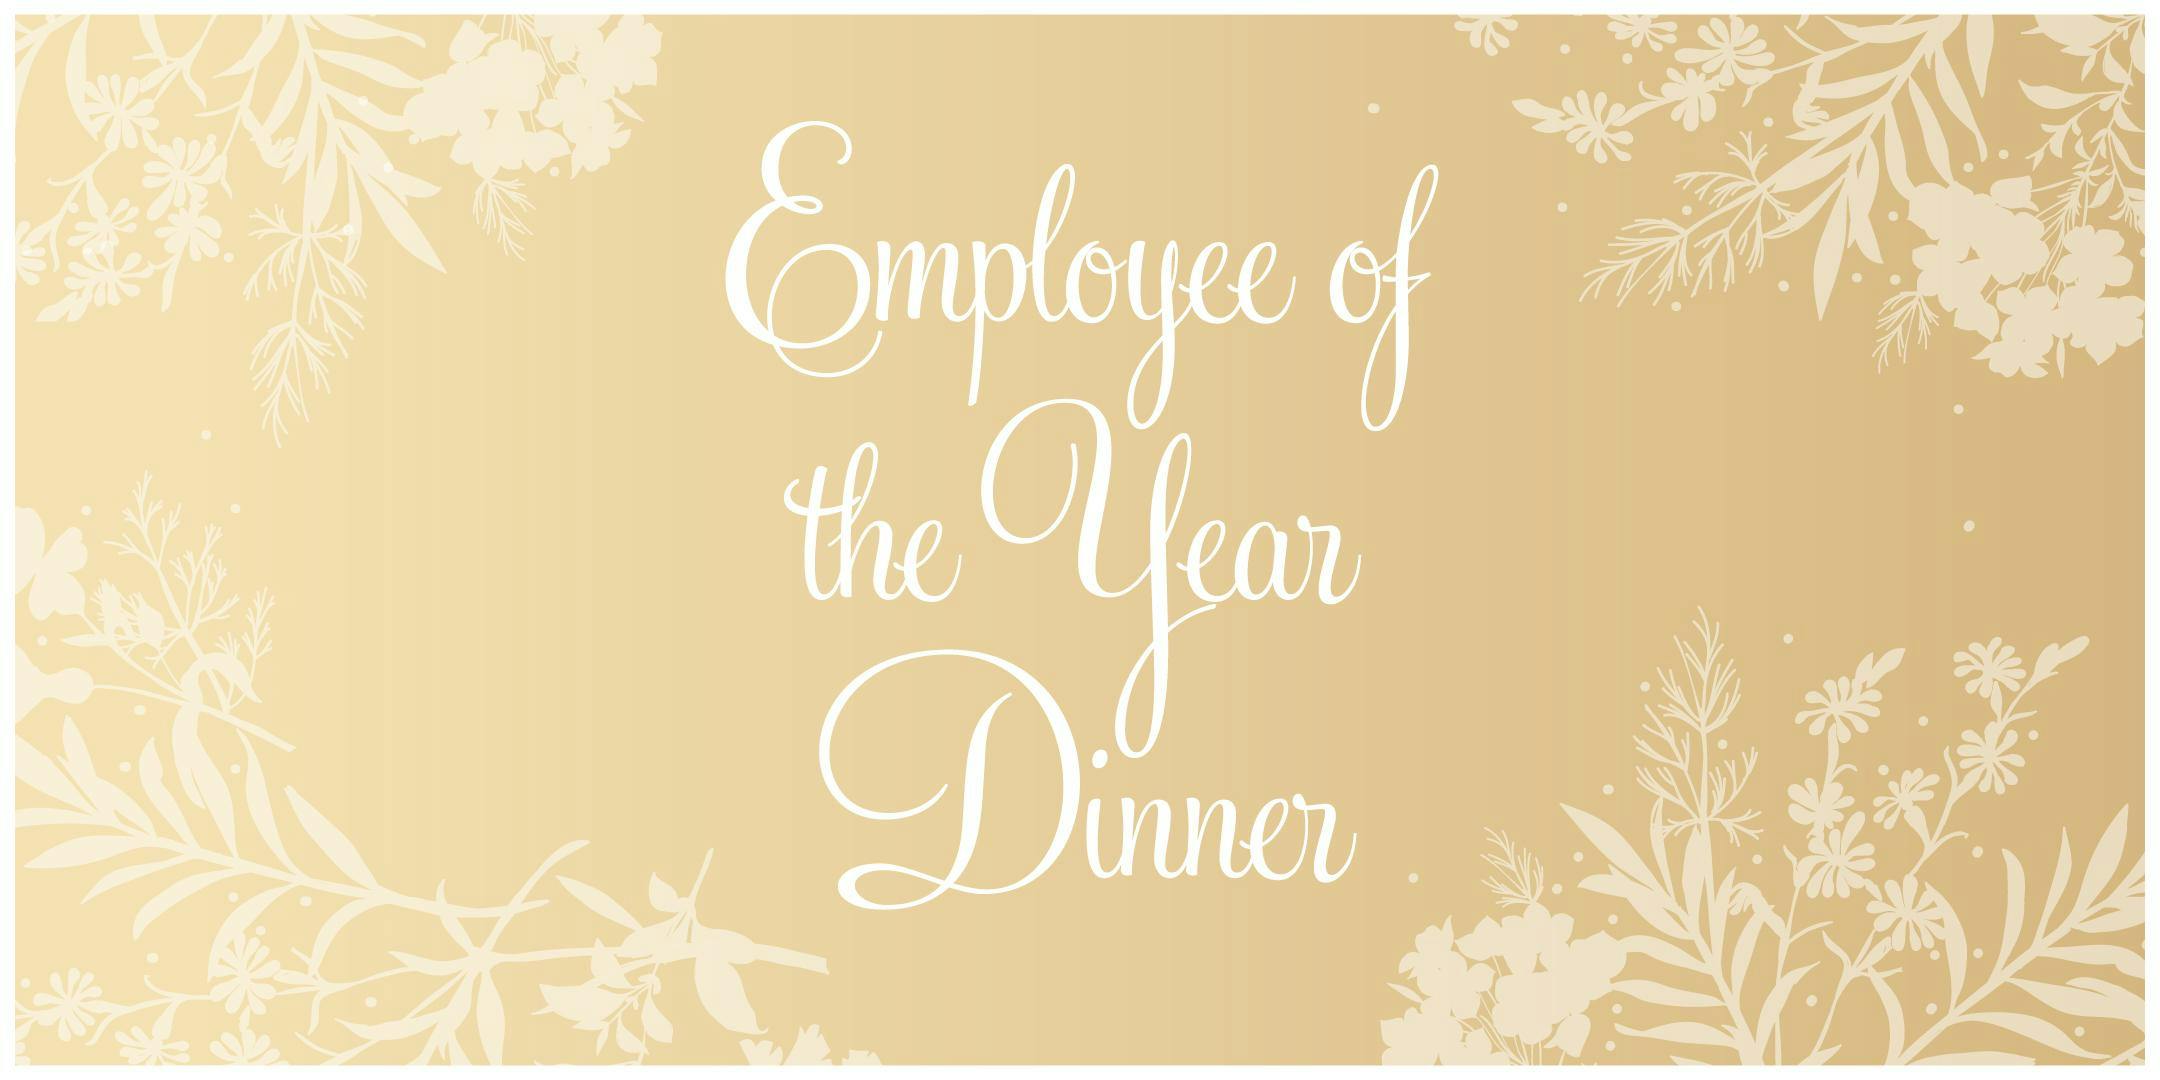 Employee of the Year Dinner